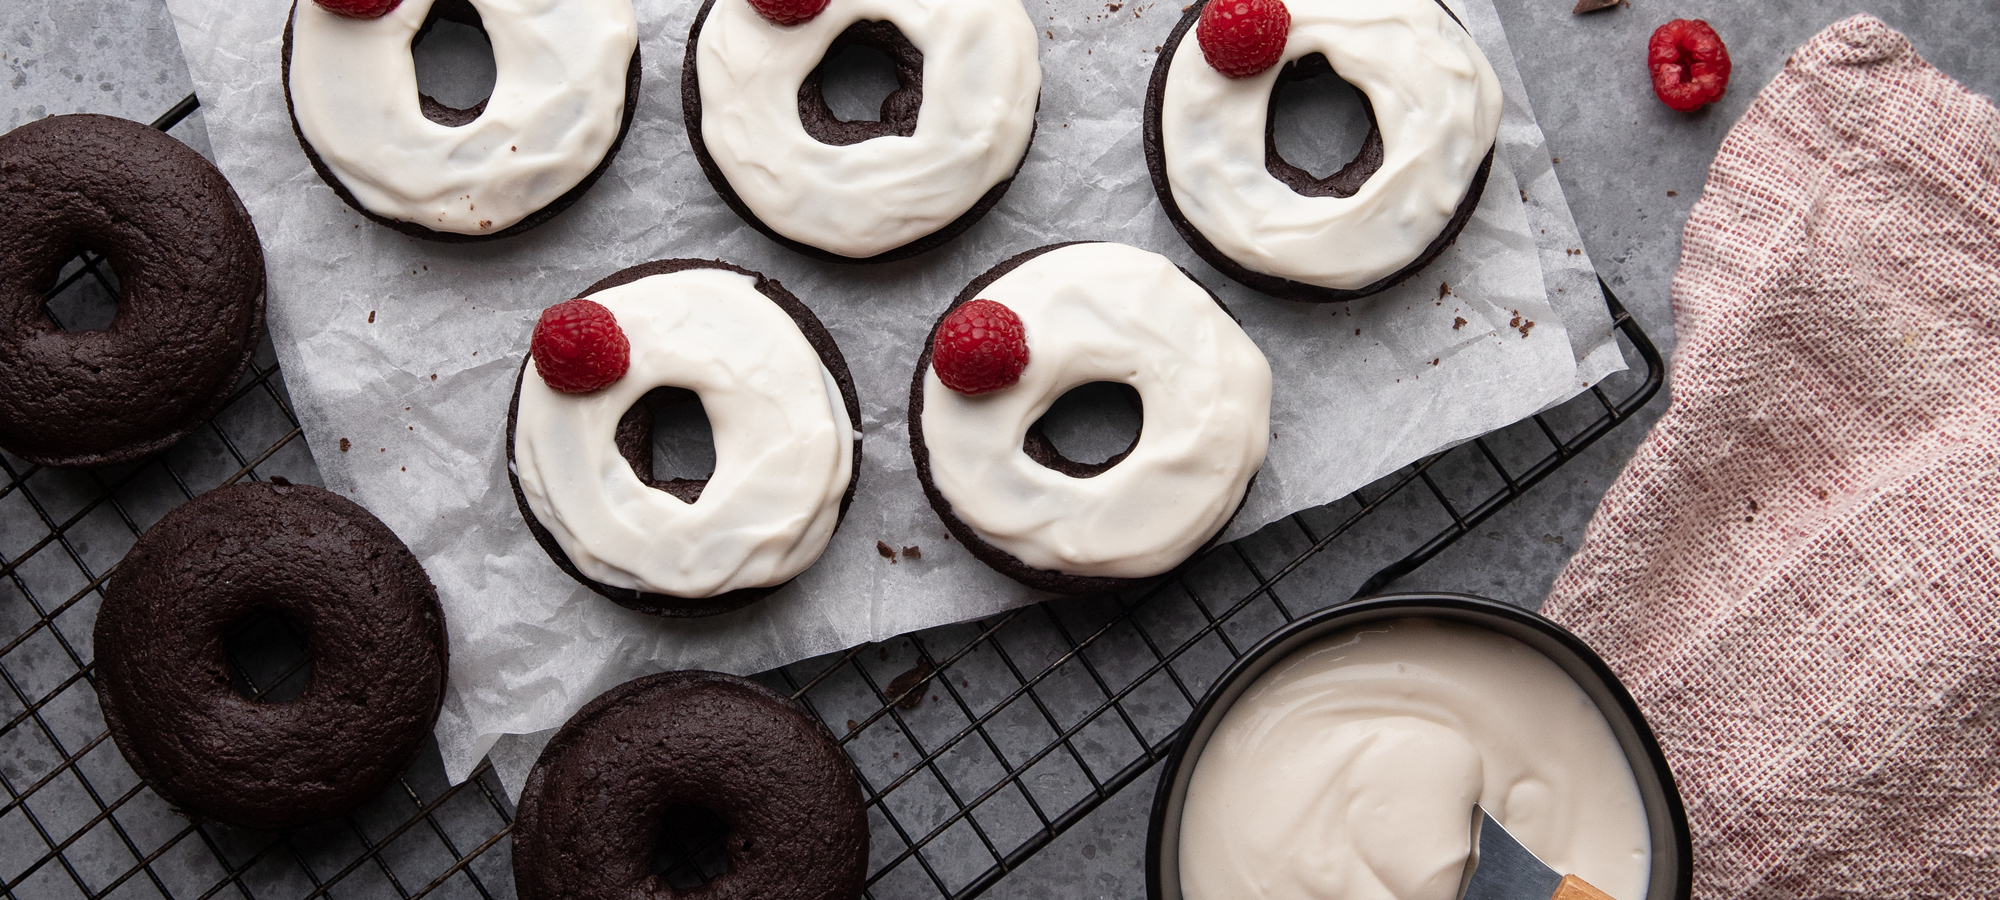 Chocolate donuts with cream cheese frosting